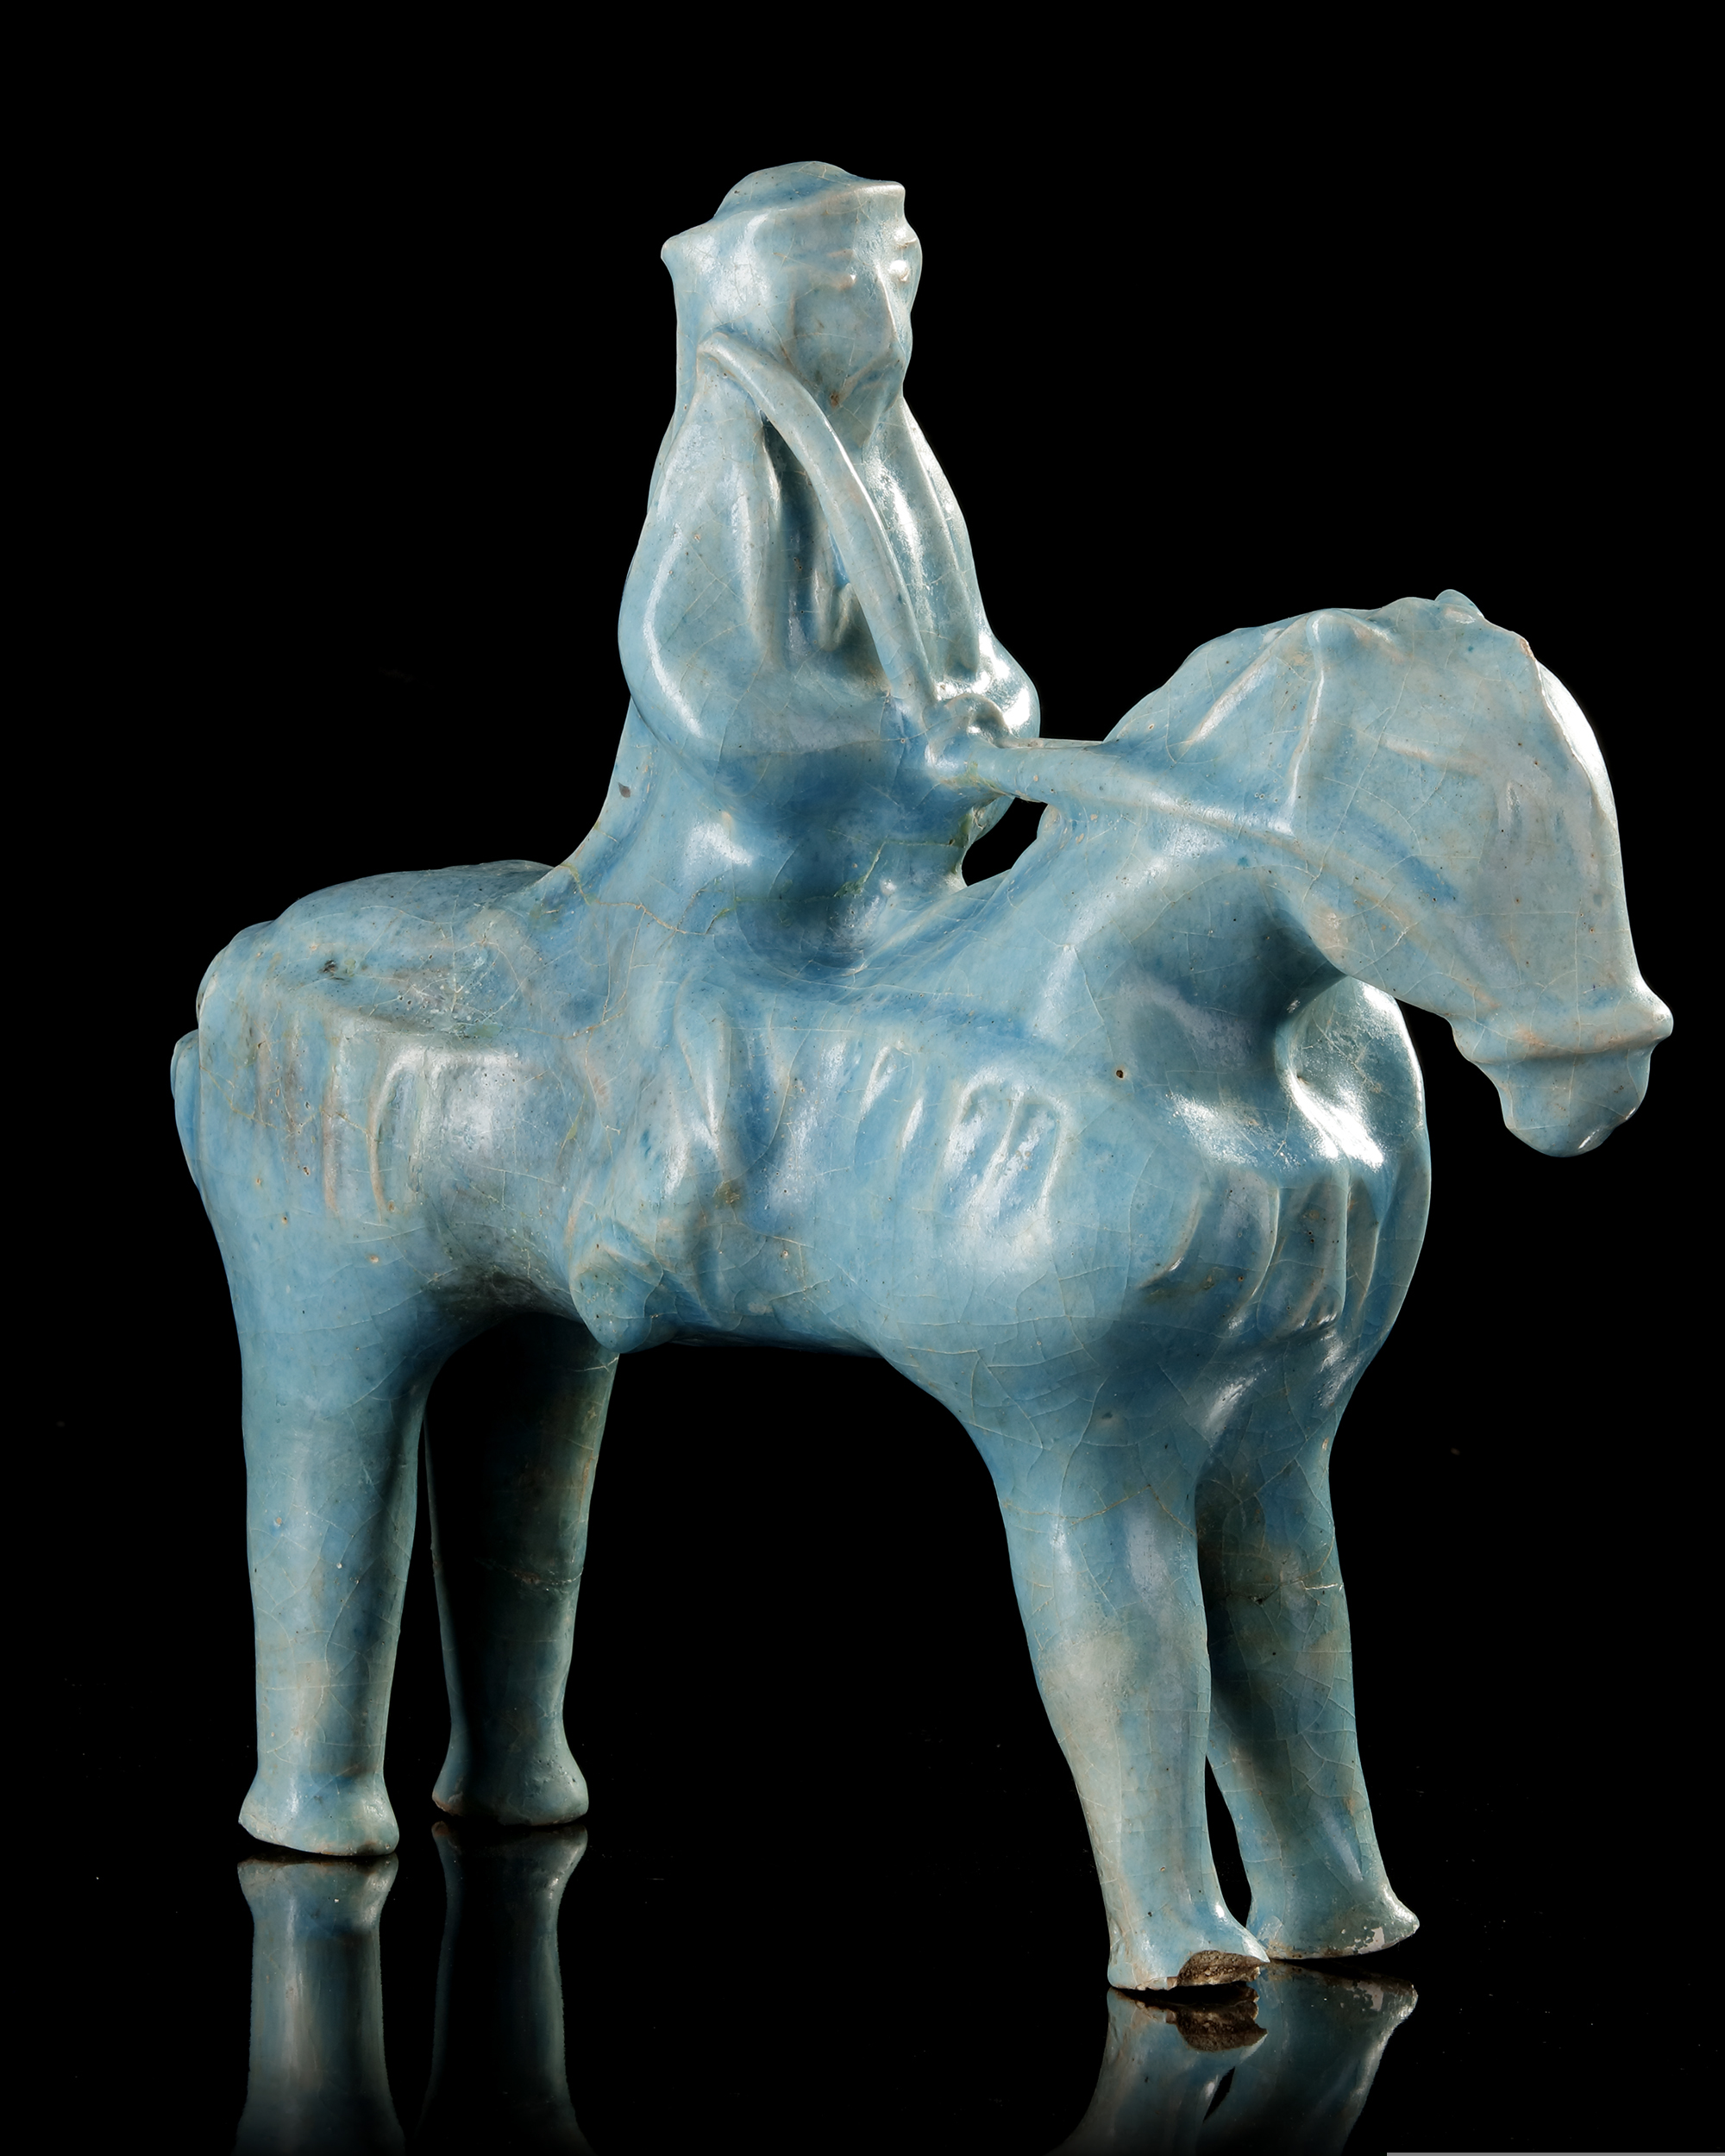 A RARE KASHAN TURQUOISE-GLAZED FIGURE OF A MONGOL, PERSIA, 13TH CENTURY - Image 4 of 7